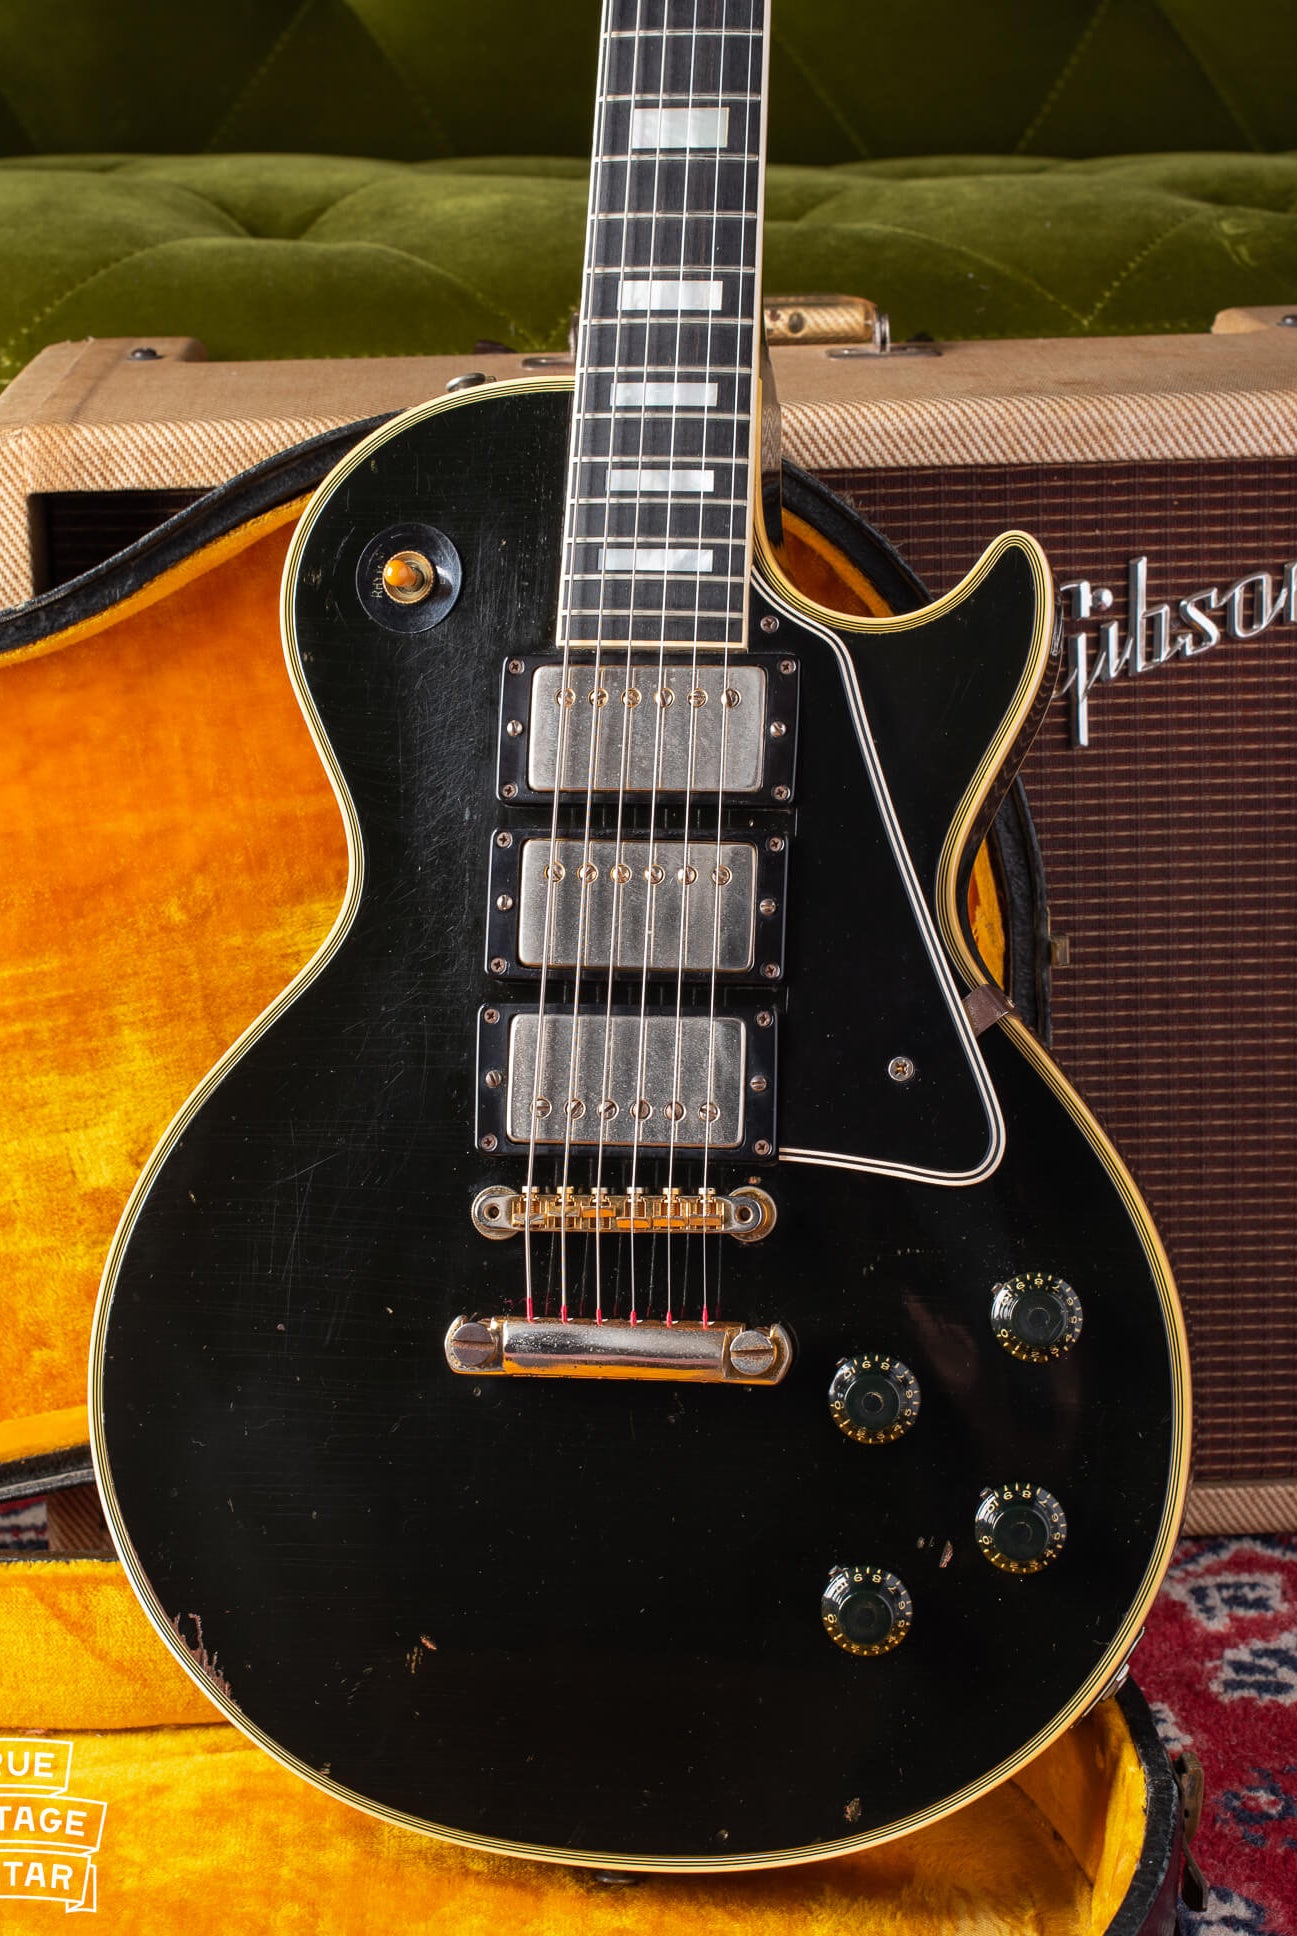 Gibson Les Paul Custom made in 1958 in black finish with three pickps